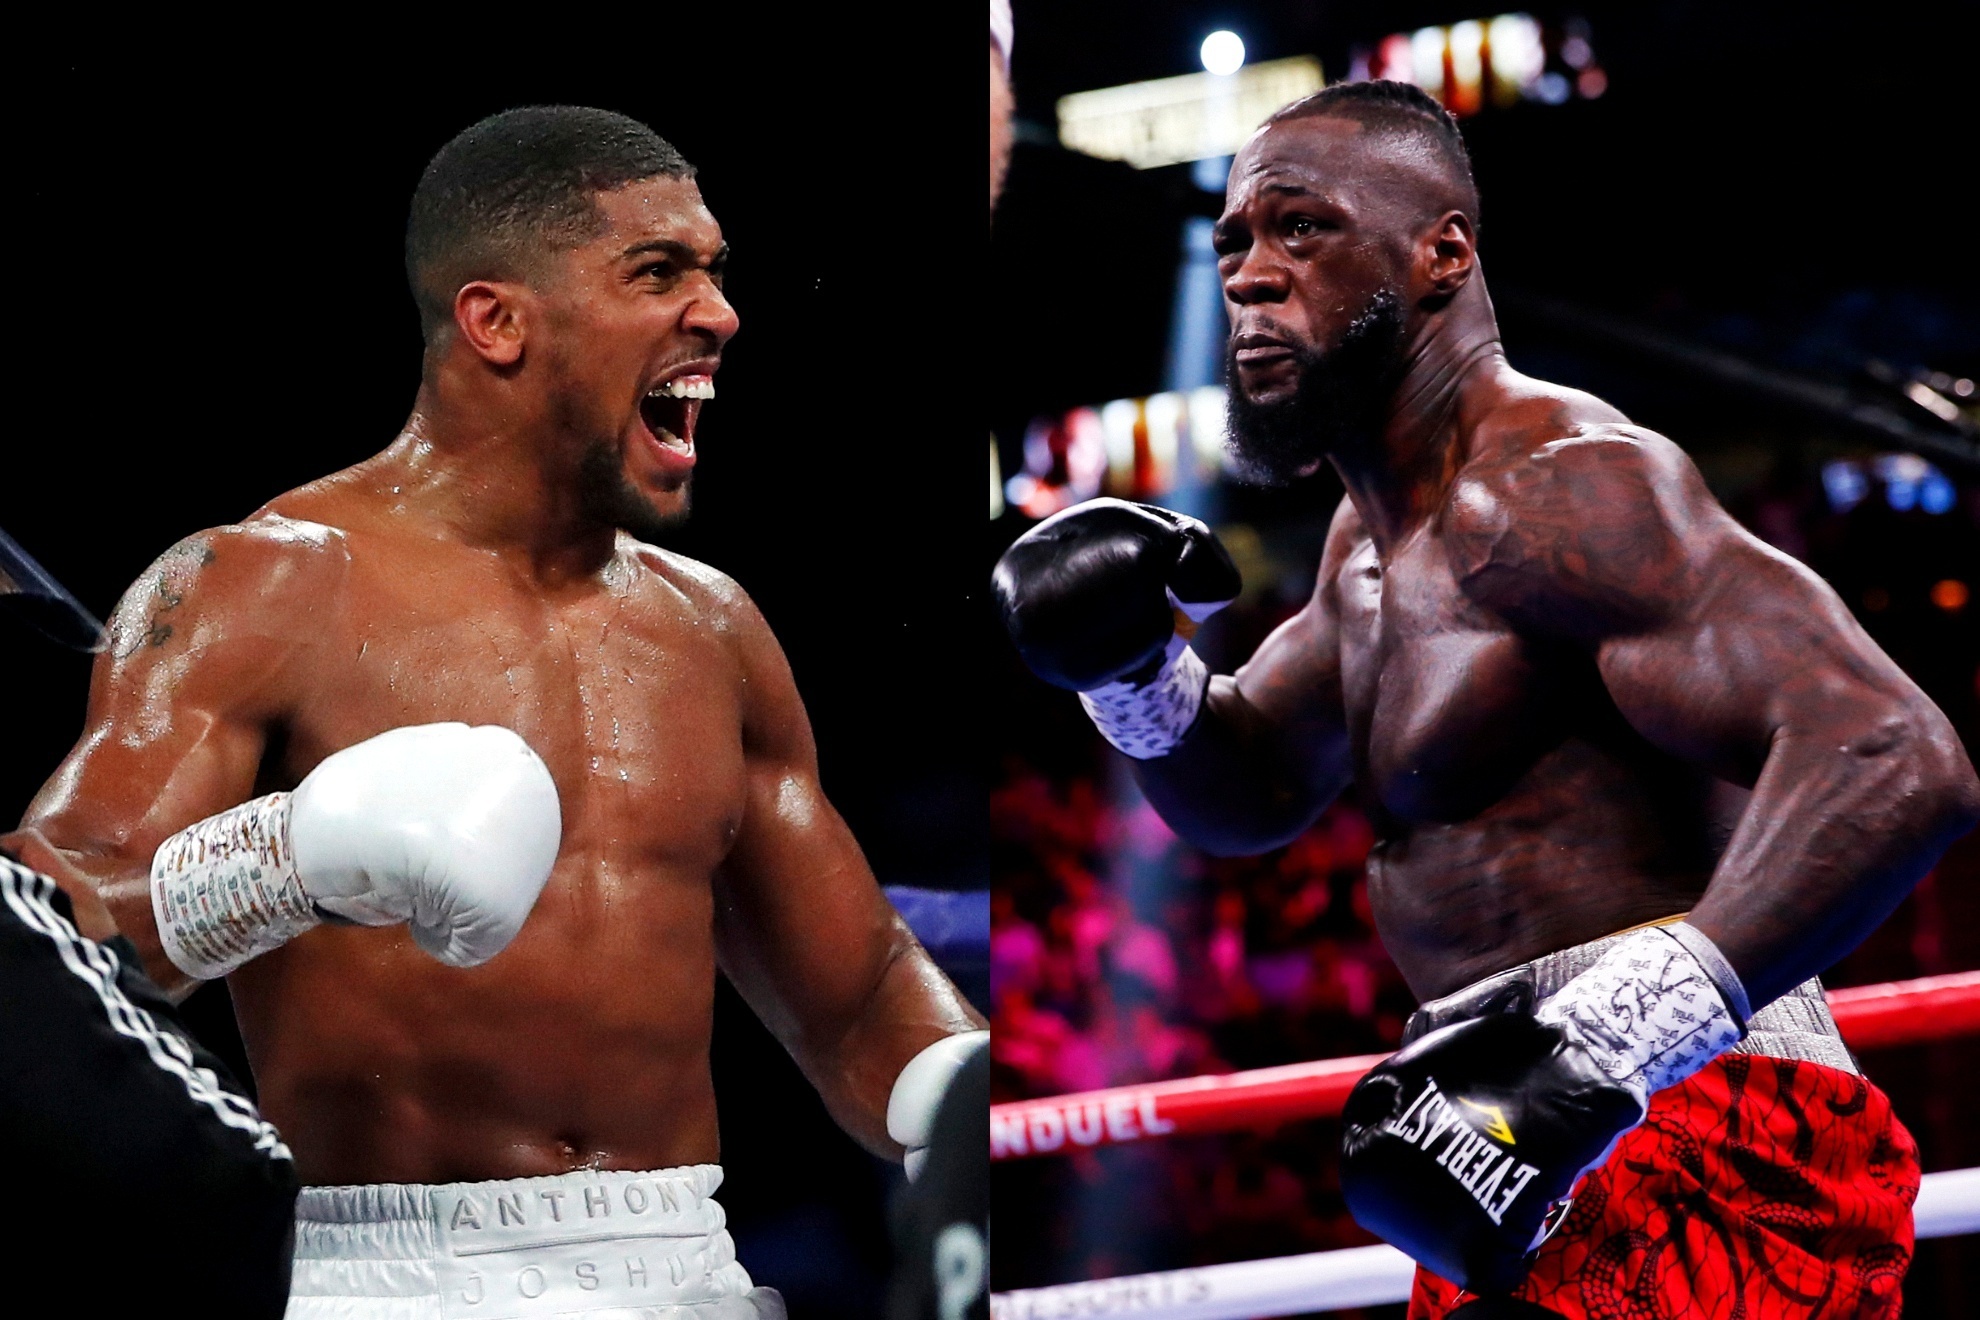 Anthony Joshua (L) and Deontay Wilder (R).